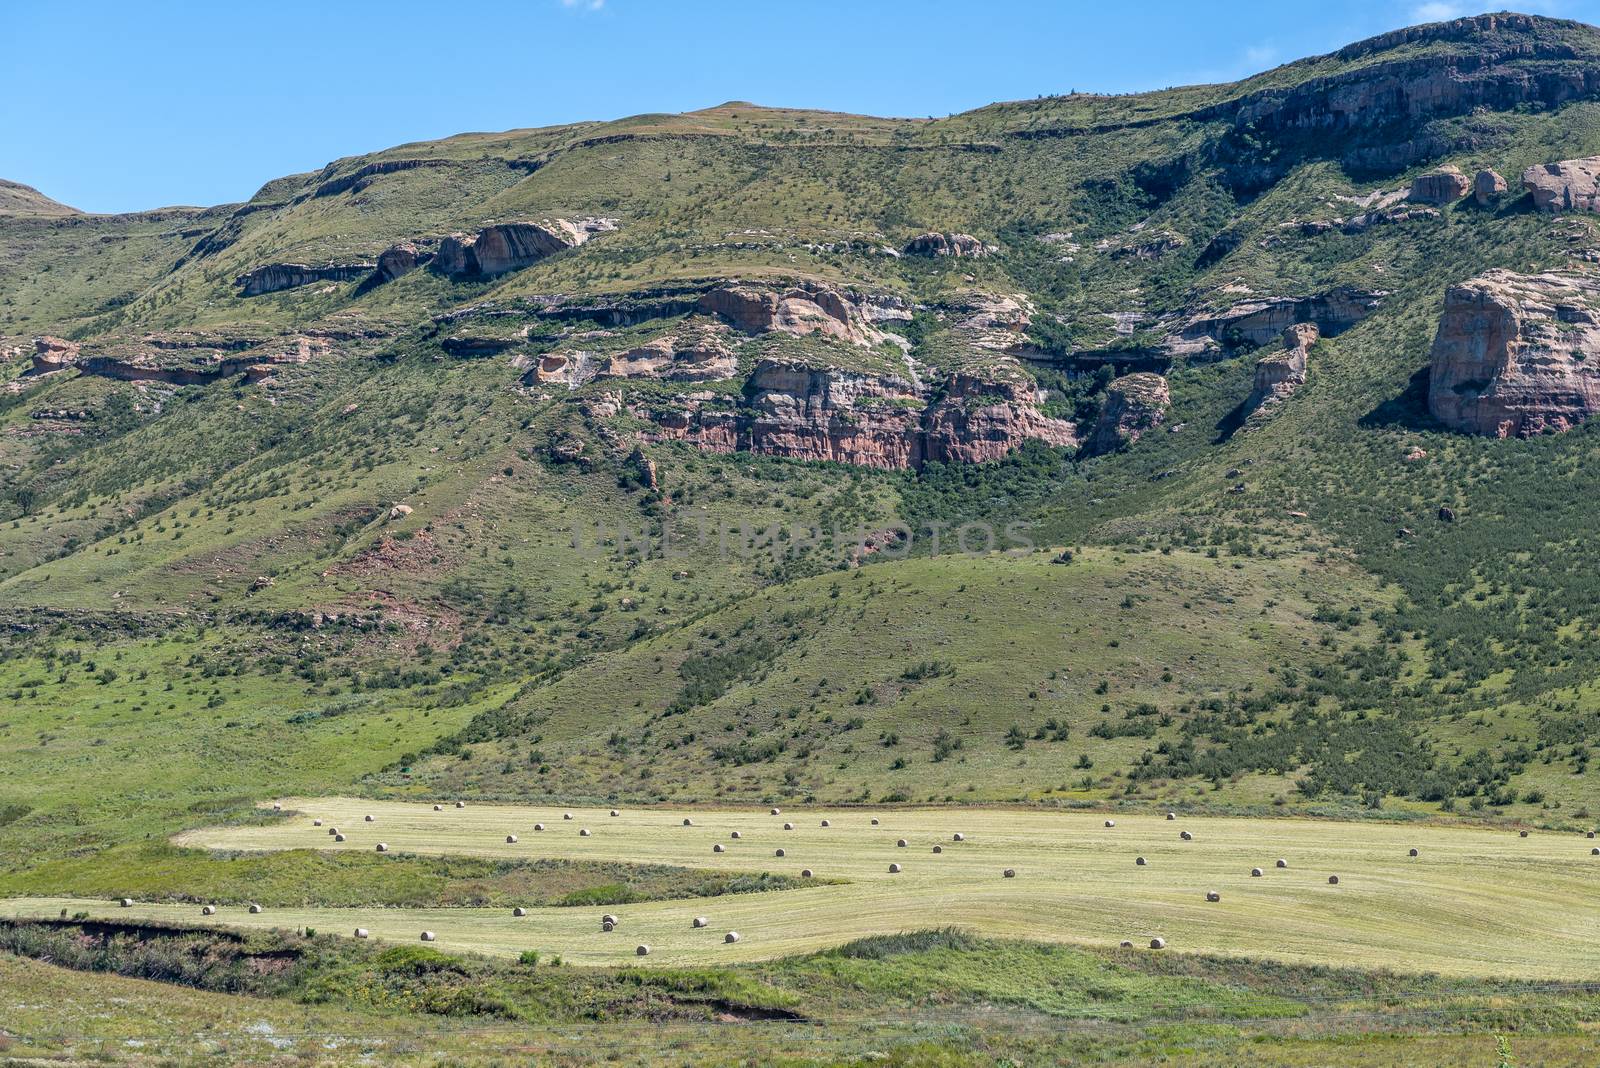 Round bales of grass in a freshly cut field near Clarens in the Free State Province